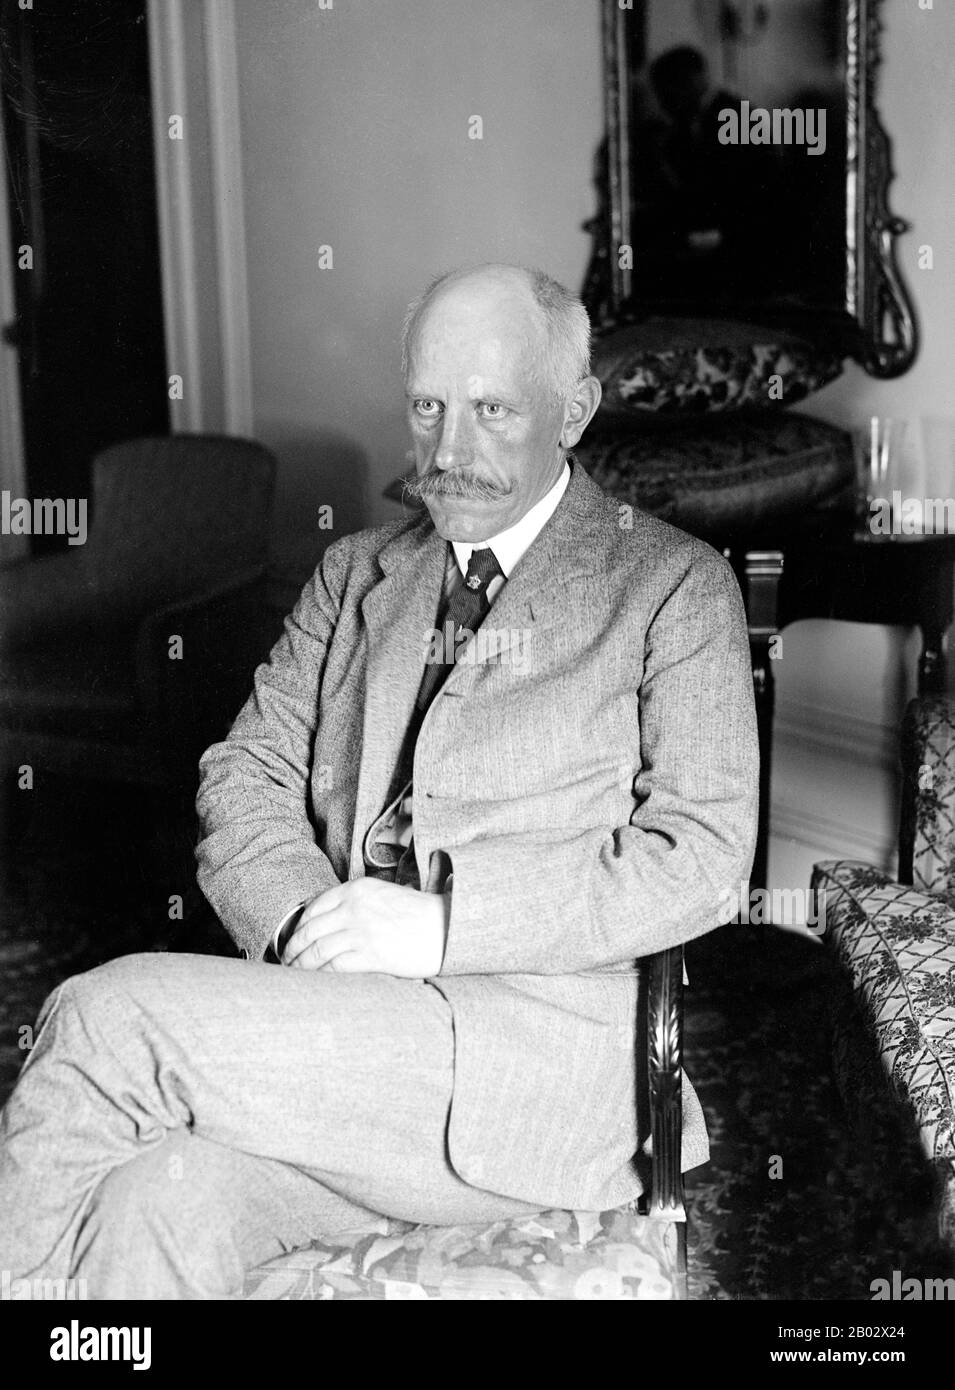 Fridtjof Nansen (10 October 1861 – 13 May 1930) was a Norwegian explorer, scientist, diplomat, humanitarian and Nobel Peace Prize laureate. In his youth a champion skier and ice skater, he led the team that made the first crossing of the Greenland interior in 1888, cross-country skiing on the island, and won international fame after reaching a record northern latitude of 86°14′ during his North Pole expedition of 1893–96.  In the final decade of his life, Nansen devoted himself primarily to the League of Nations, following his appointment in 1921 as the League's High Commissioner for Refugees. Stock Photo